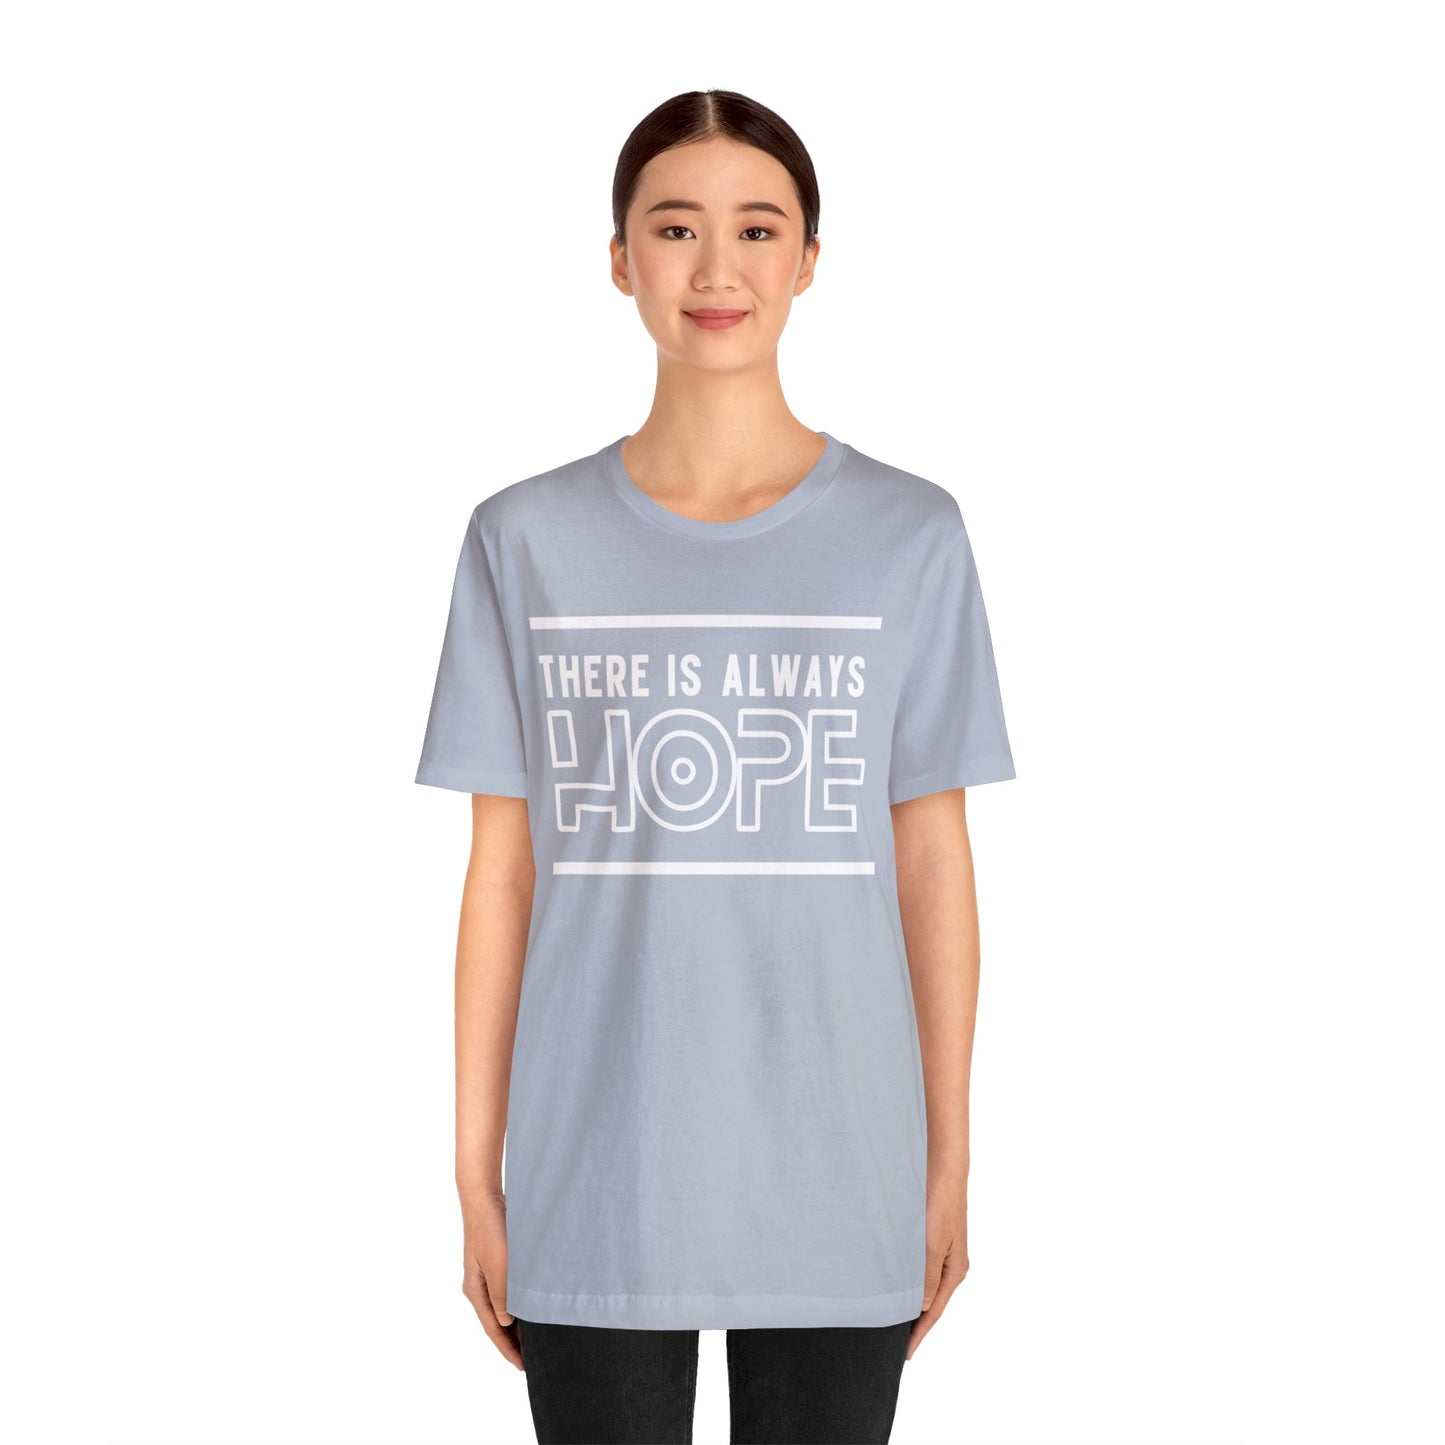 There Is Always Hope - Graphic T Shirt For Men and Women